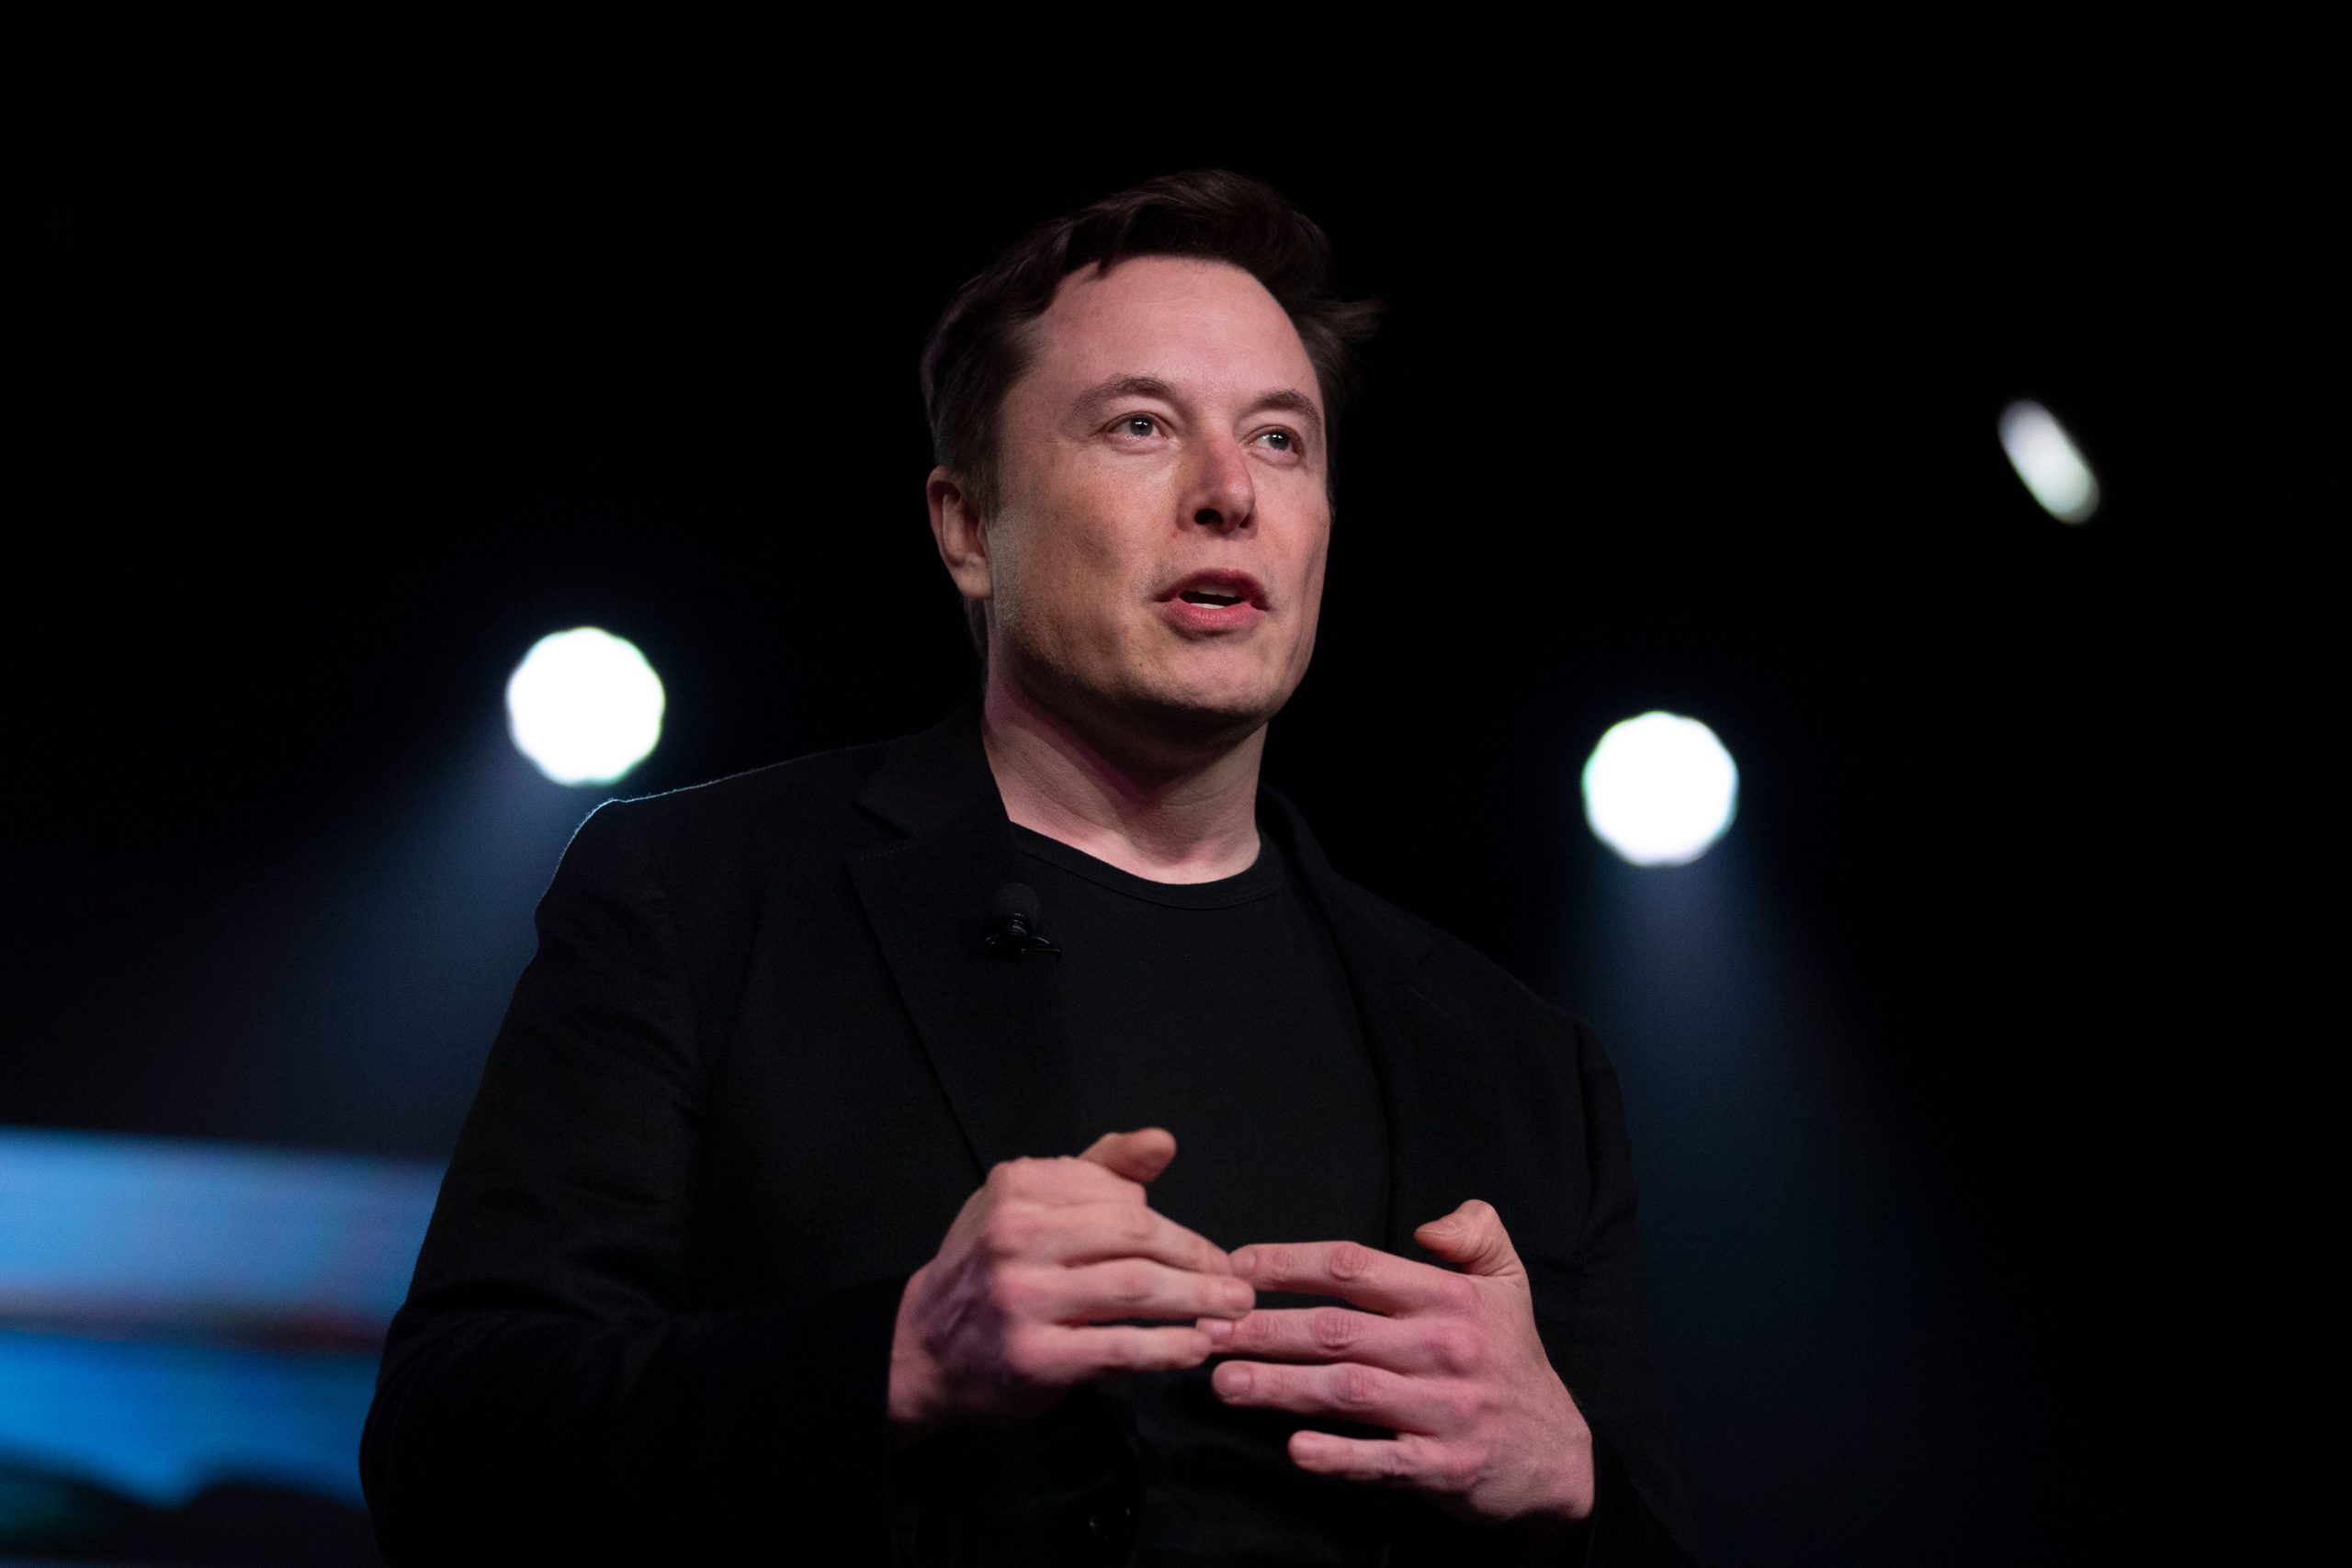 Elon Musk outlines vision for Twitter, wants his ‘worst critics’ to stay